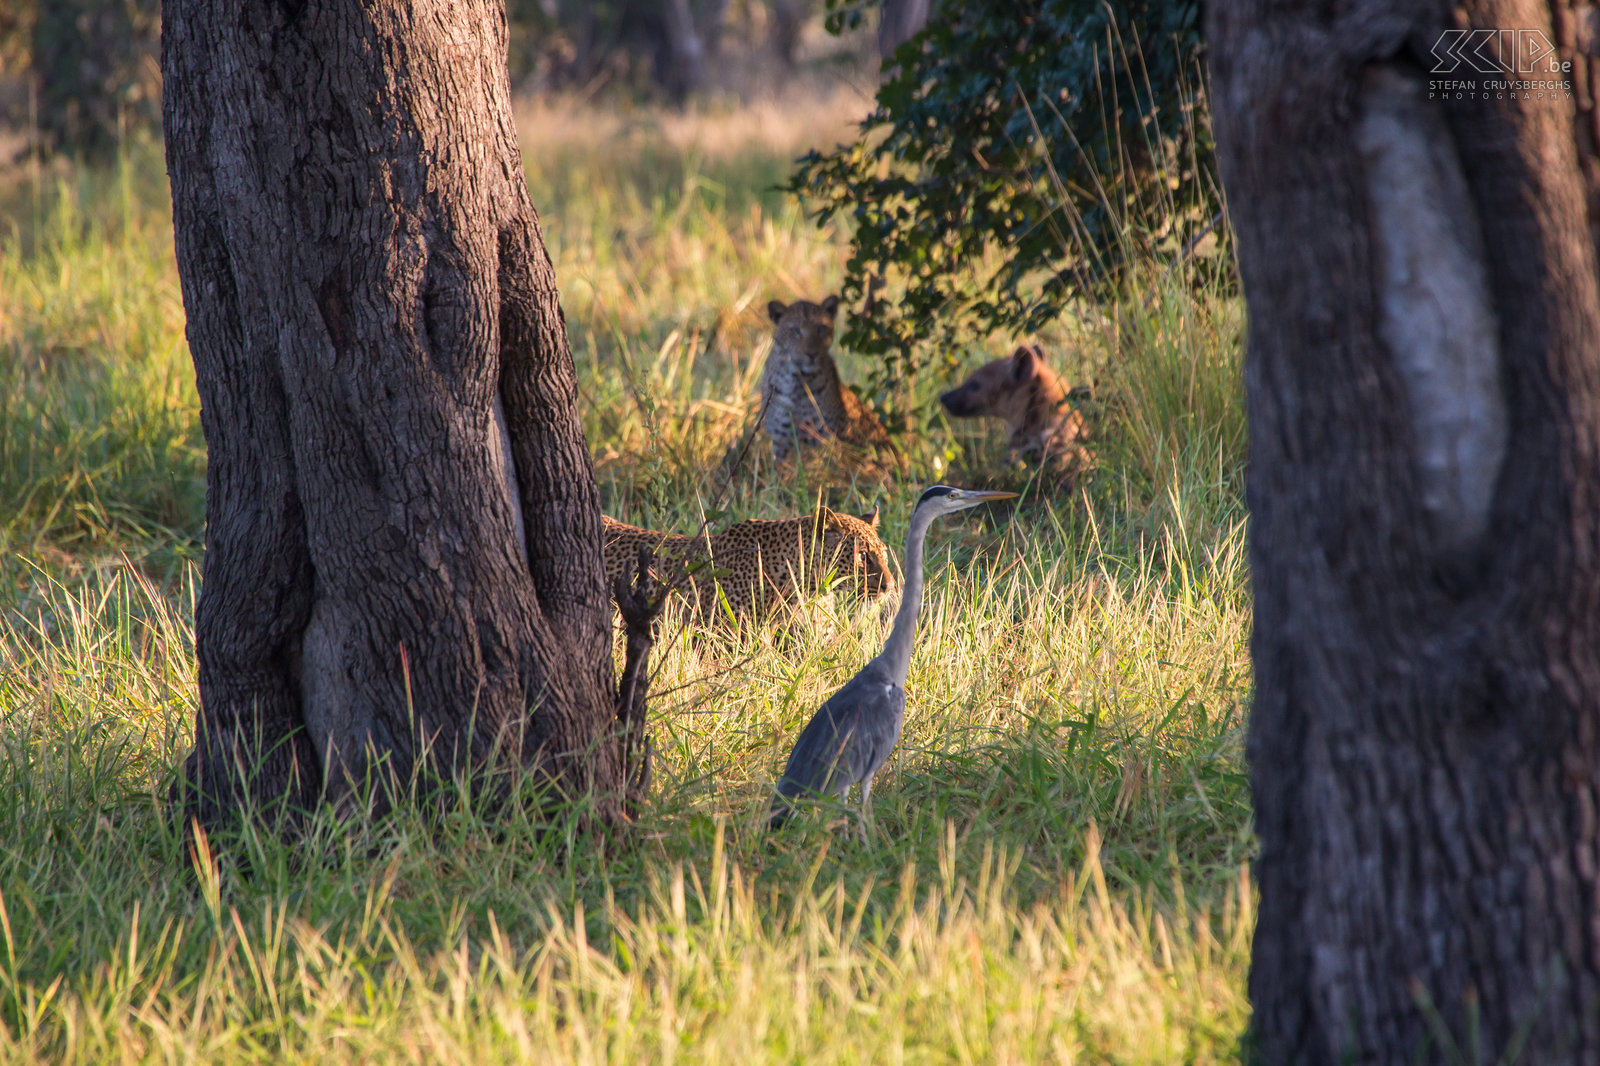 South Luangwa - Leopards, hyena and grey heron The next morning we encountered two leopards, probably brothers. A hyena was just sitting near them. This is quite unusual because leopards and hyenas are natural enemies and leopards usually live solitary. A heron was also close by and I managed to capture them all in one photo. Stefan Cruysberghs